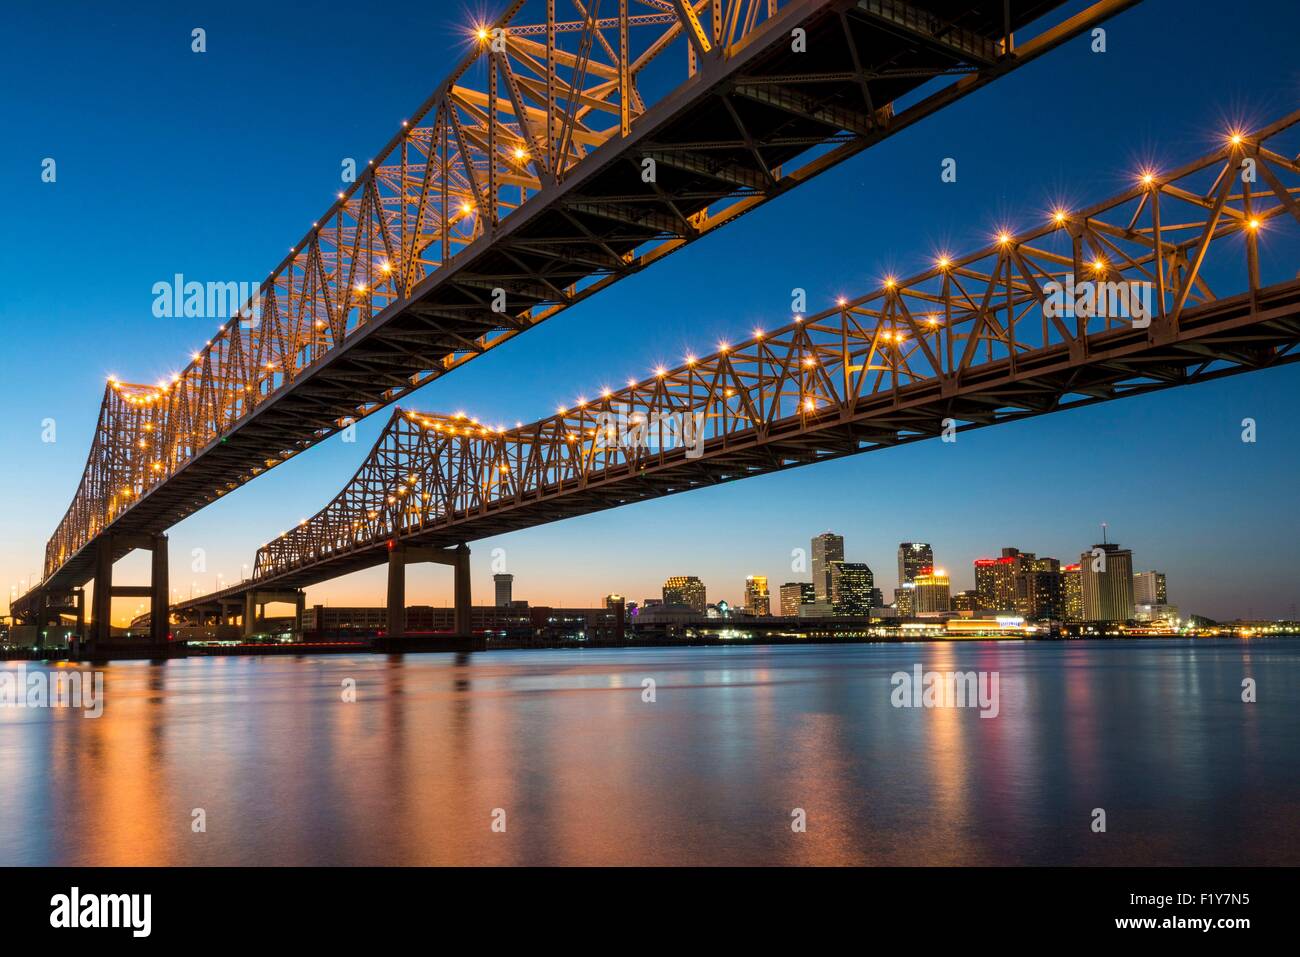 United States, Louisiana, New Orleans, the Crescent City Connection Bridge on the Mississippi river Stock Photo